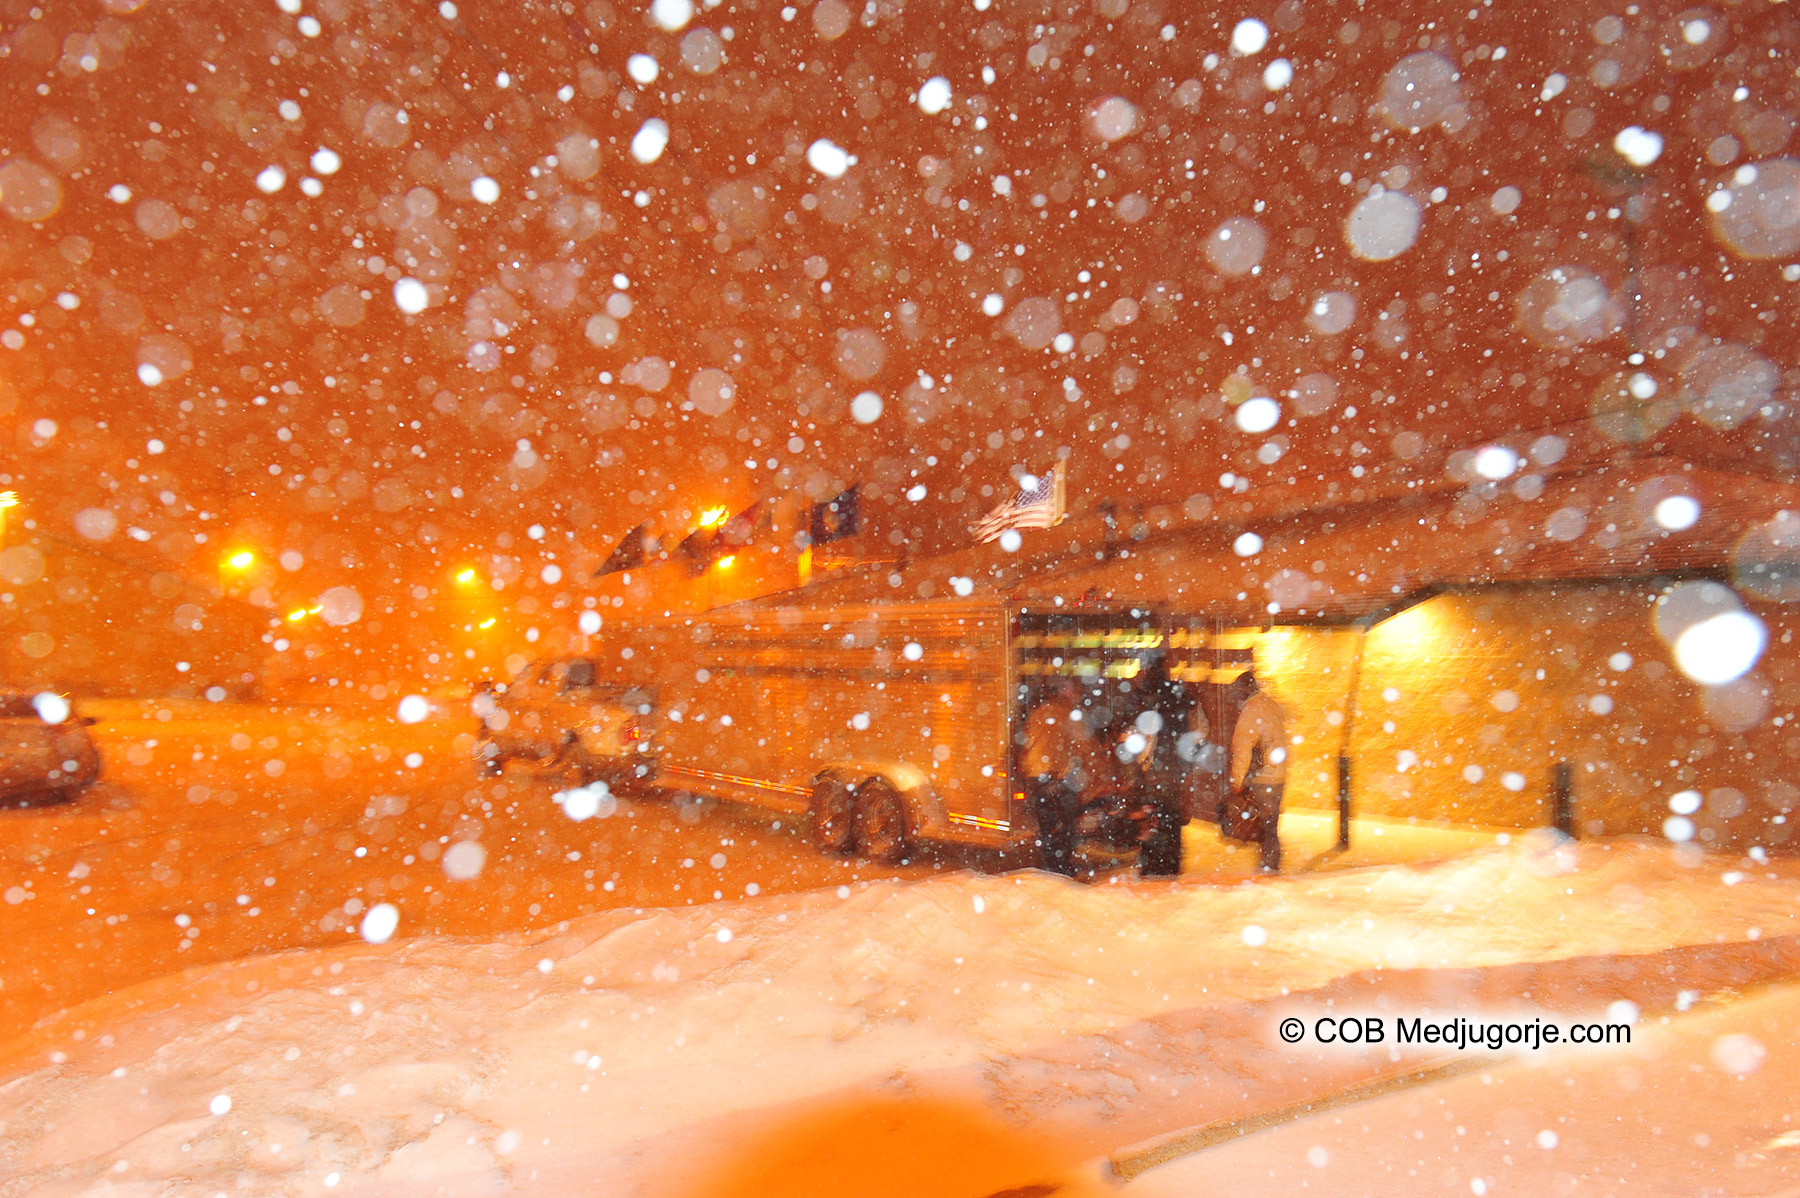 Snow storm, February 21, 2013, during A Friend of Medjugorje's talk in Iowa